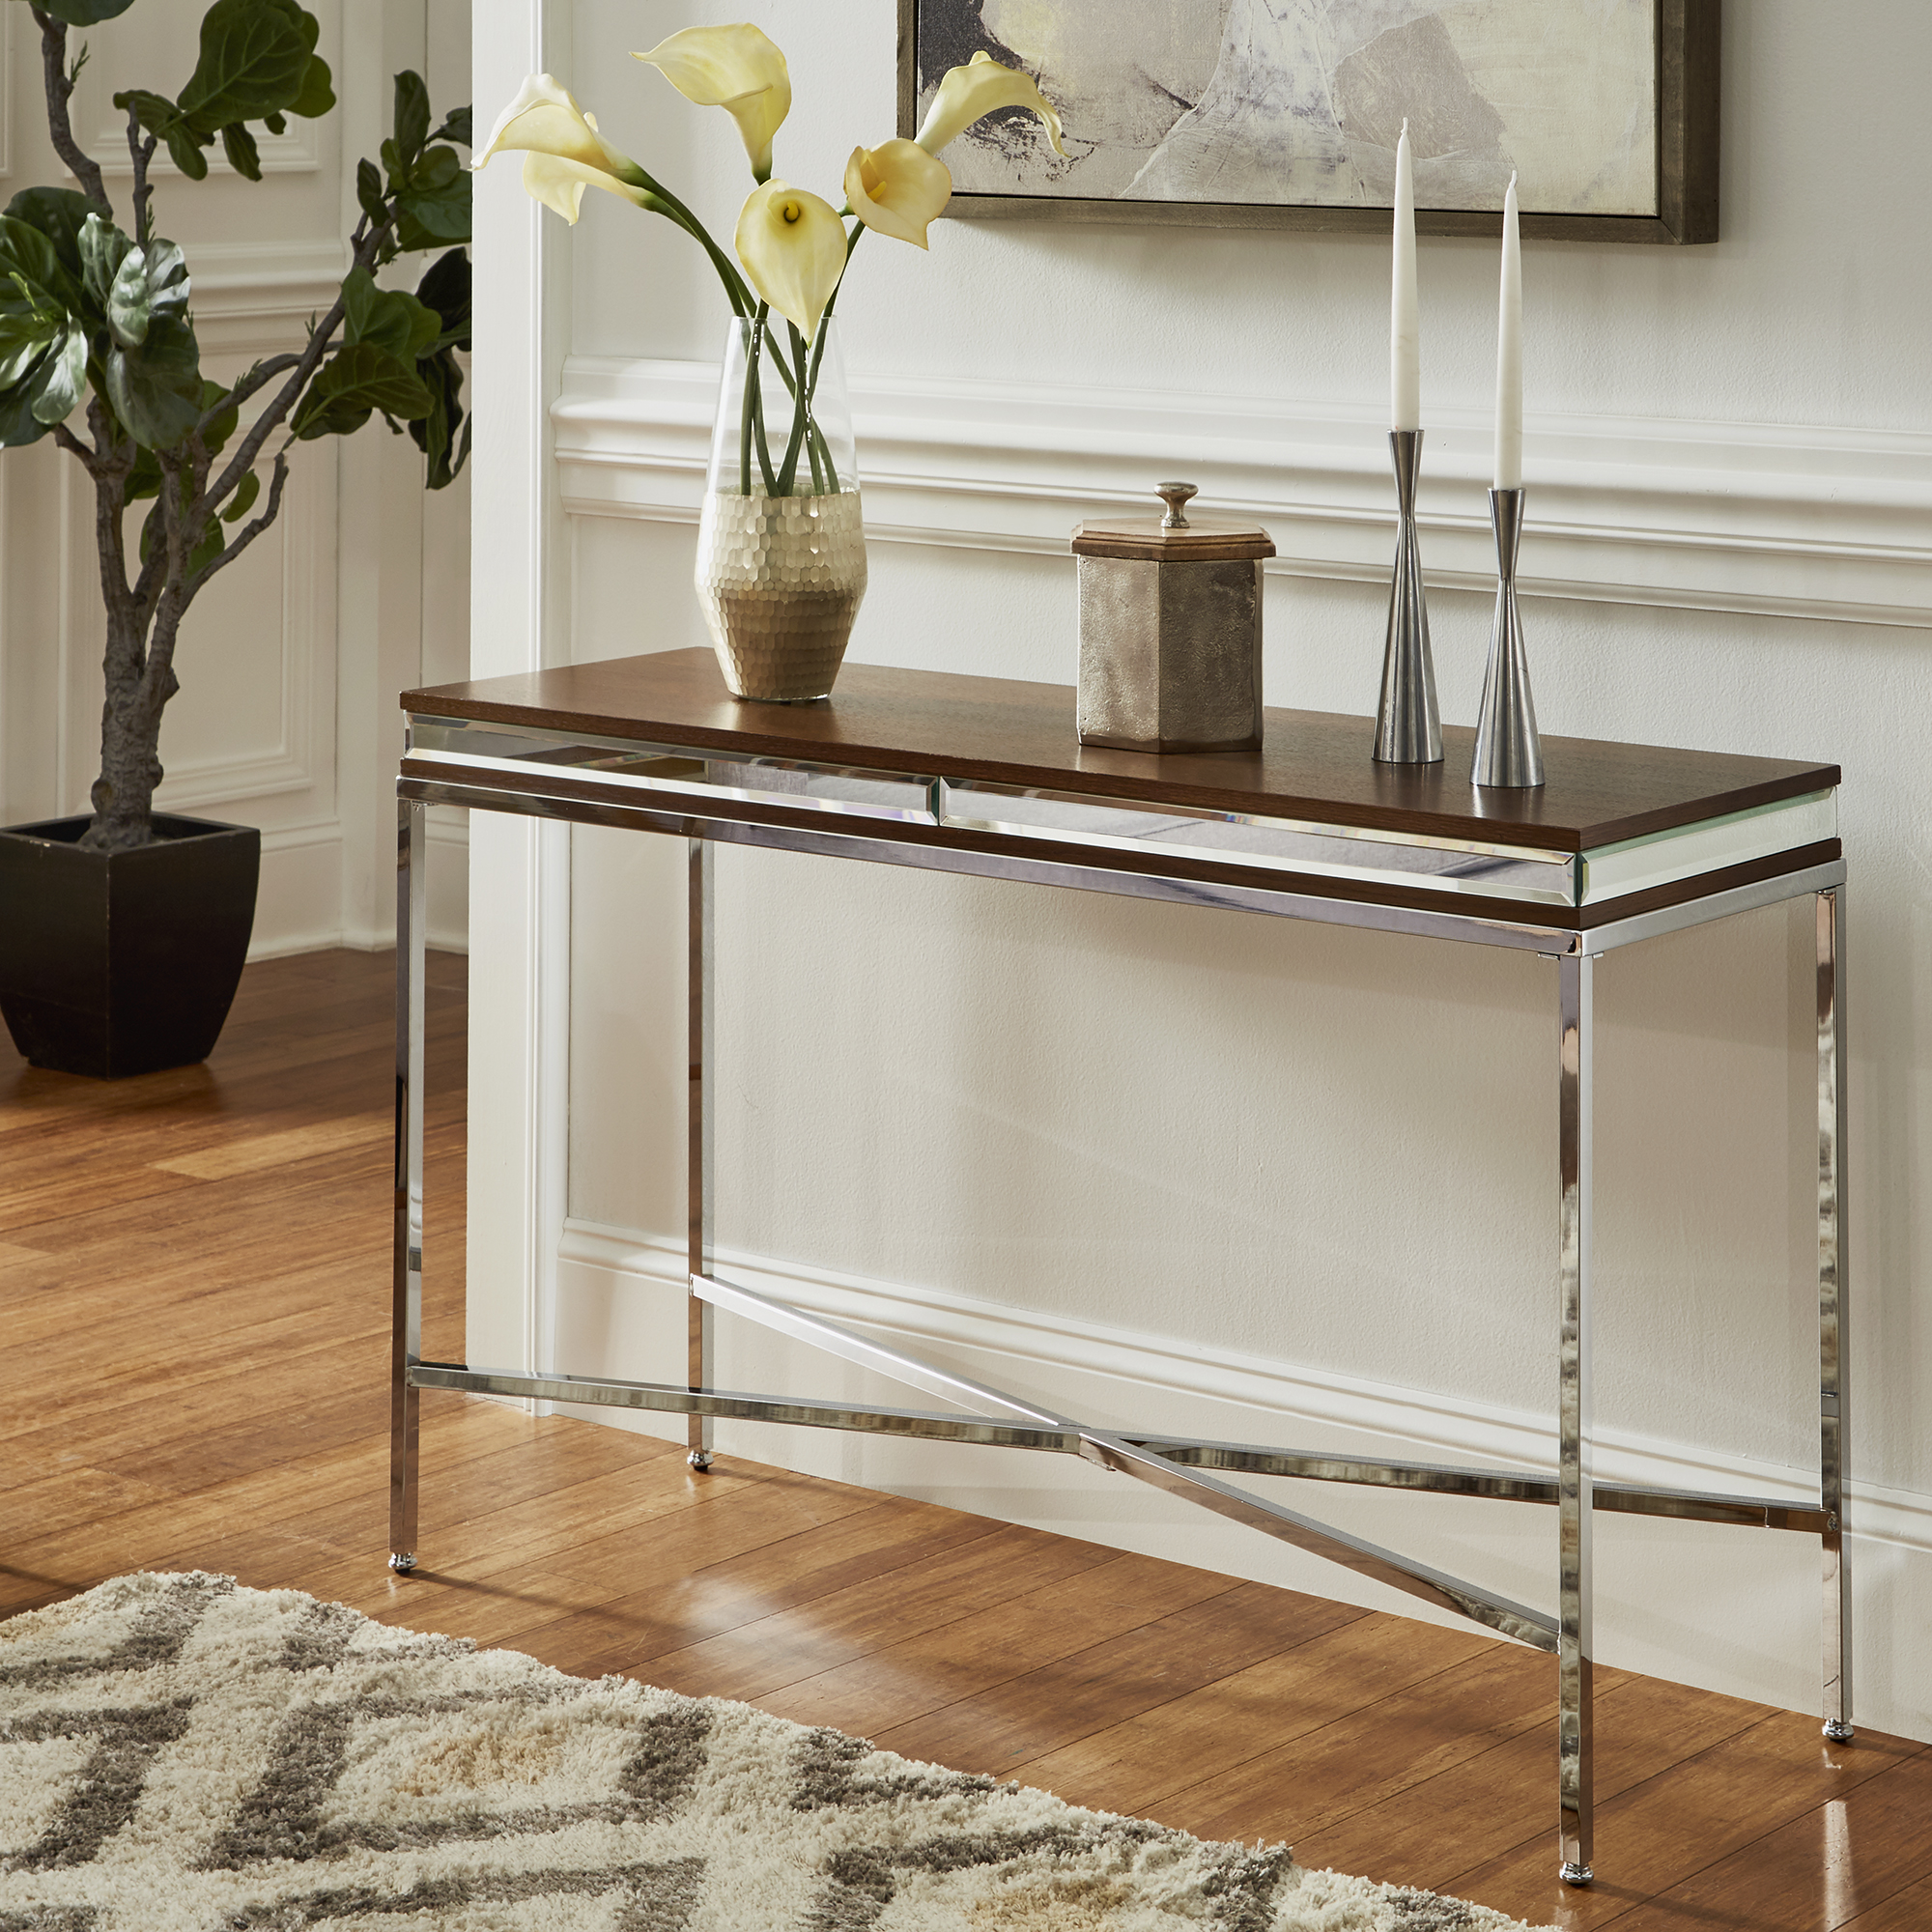 This is the Mirror Trim Sofa Table in Chrome Finish by iNSPIRE Q Bold. It is placed in a hallway with a few pieces of décor on display.